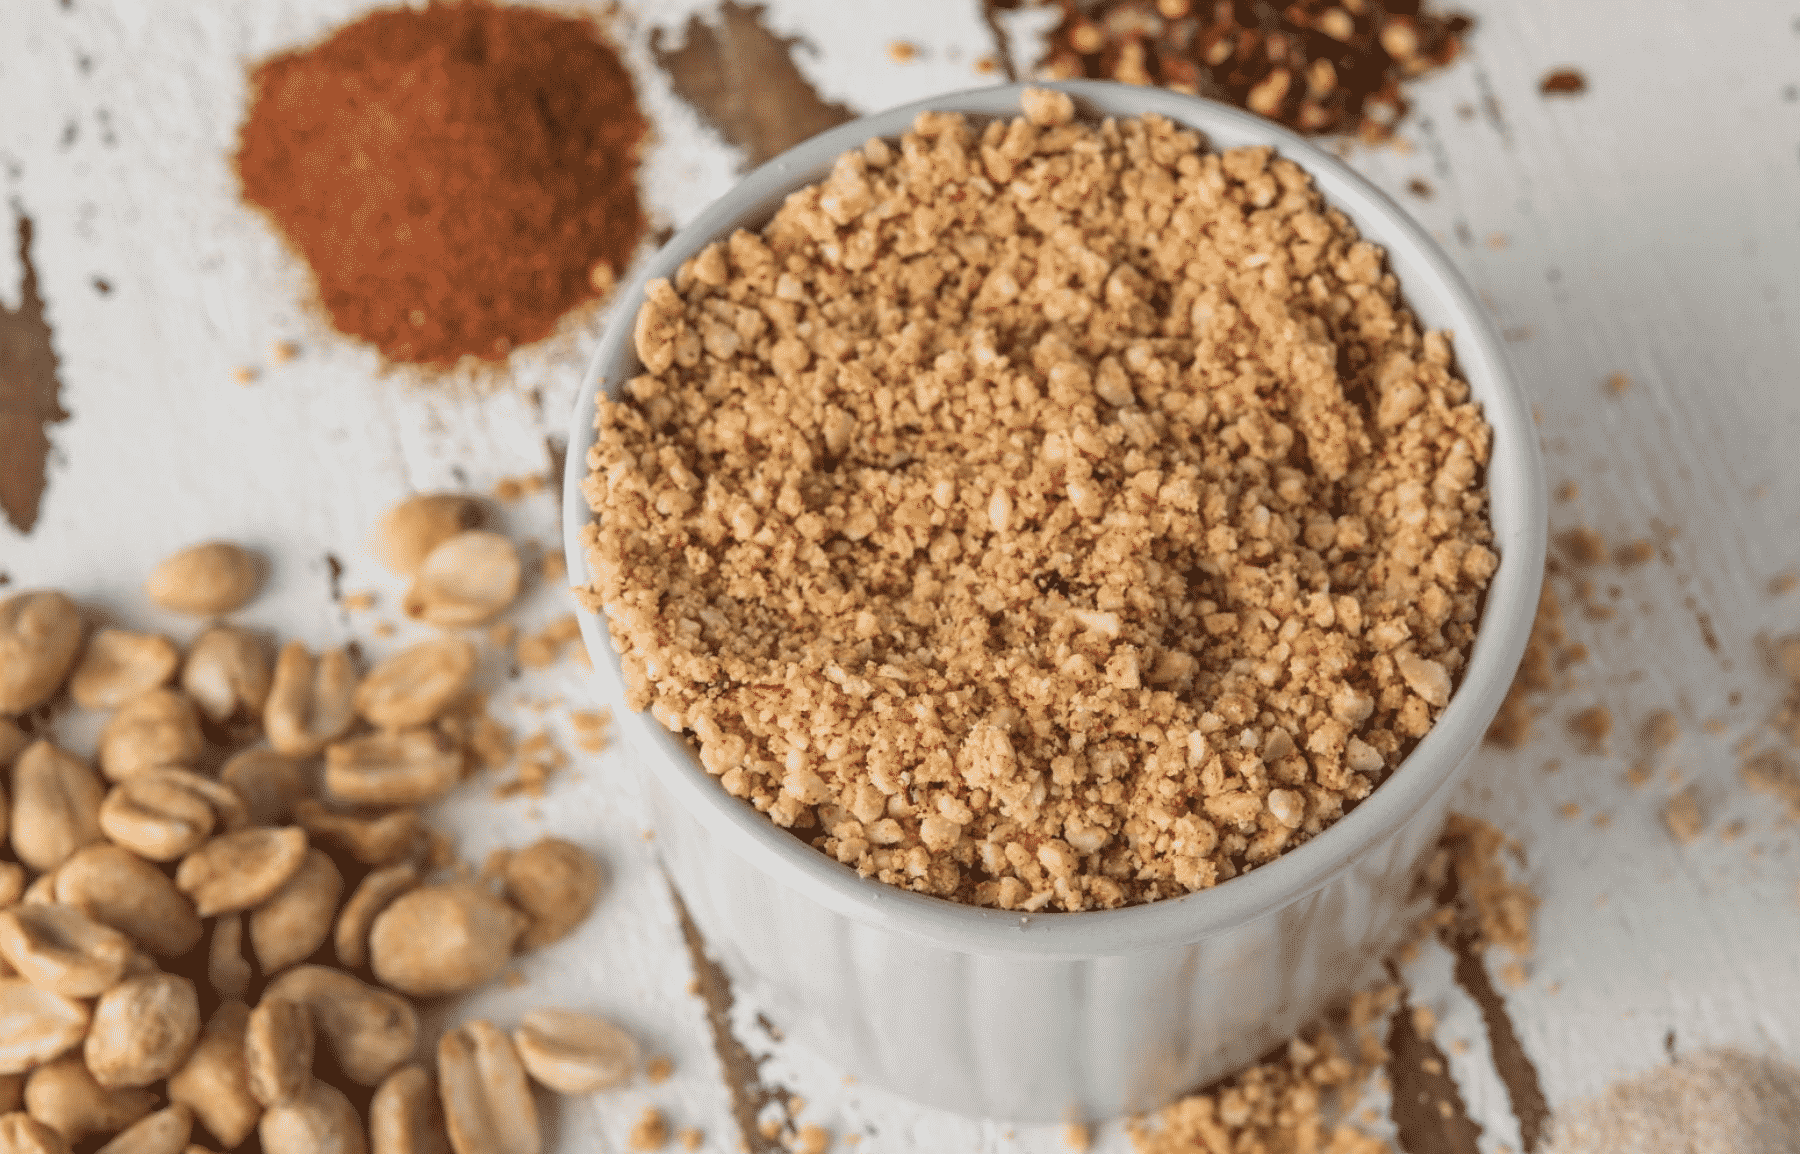 How to Activate Garlic Powder and Why You Should